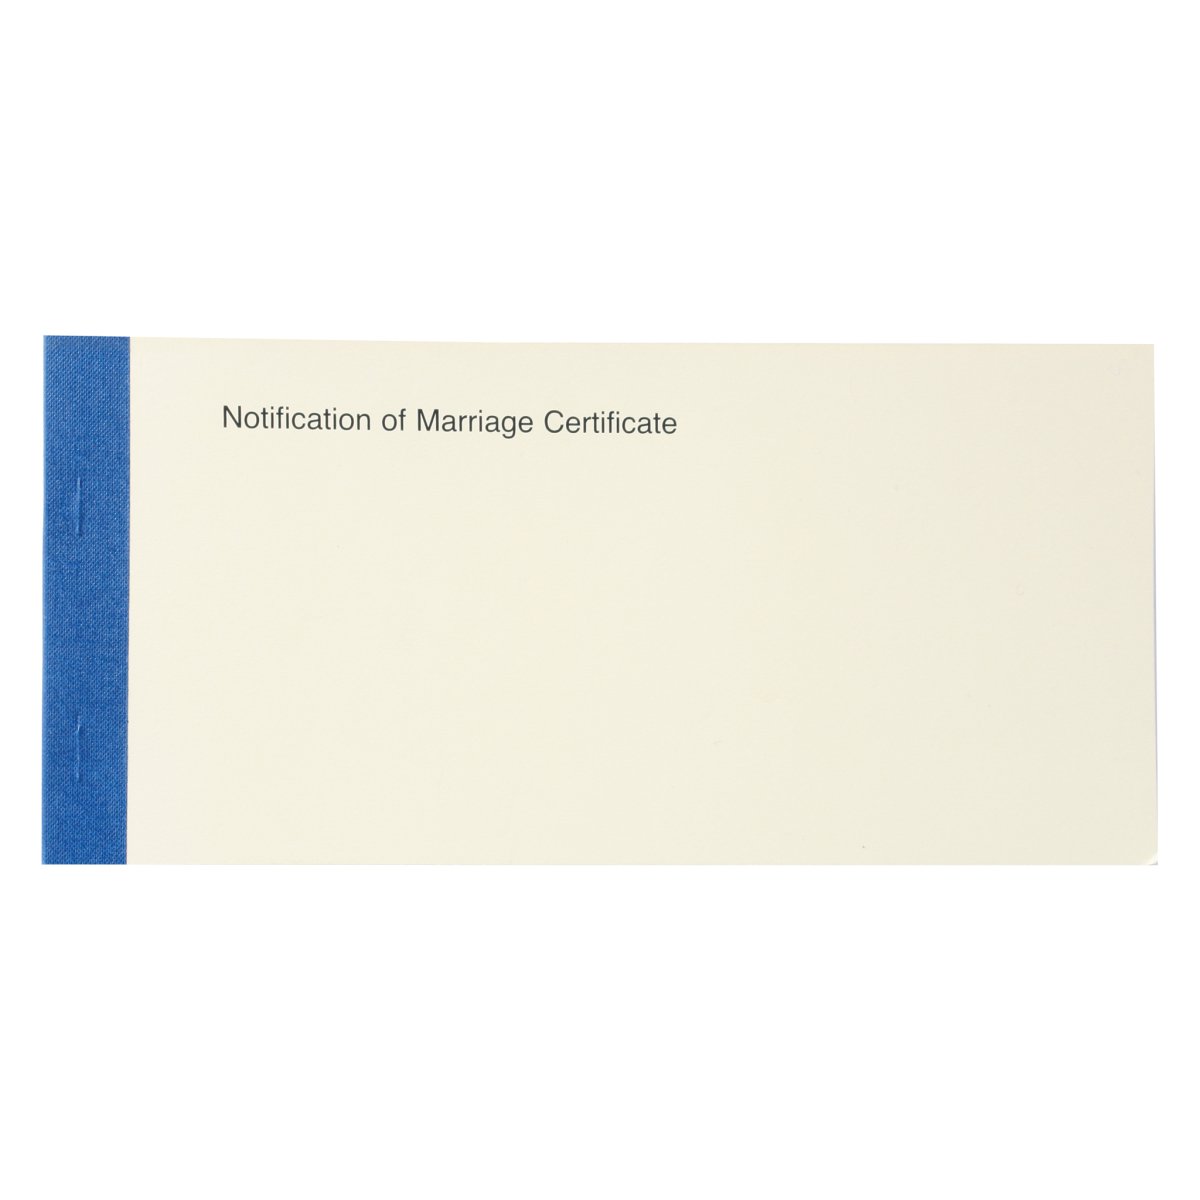 Notification of Marriage Certificates for Church Records - Hayes & Finch